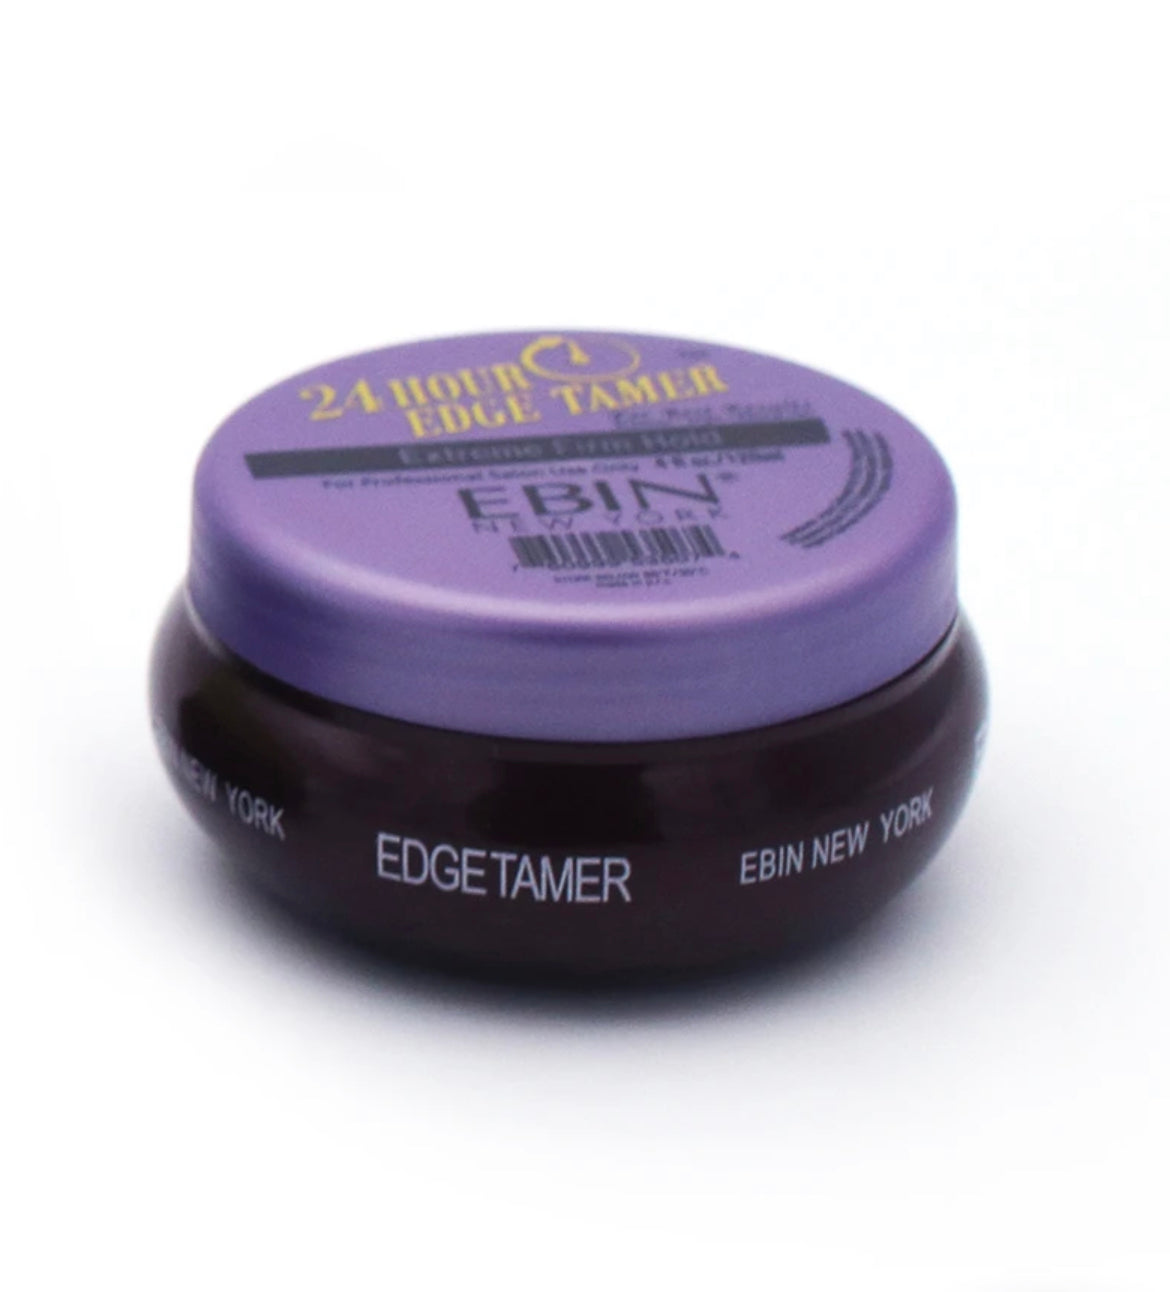 24 HOUR EDGE TAMER- EXTREME FIRM HOLD - Elegant Boutique Beauty Supply